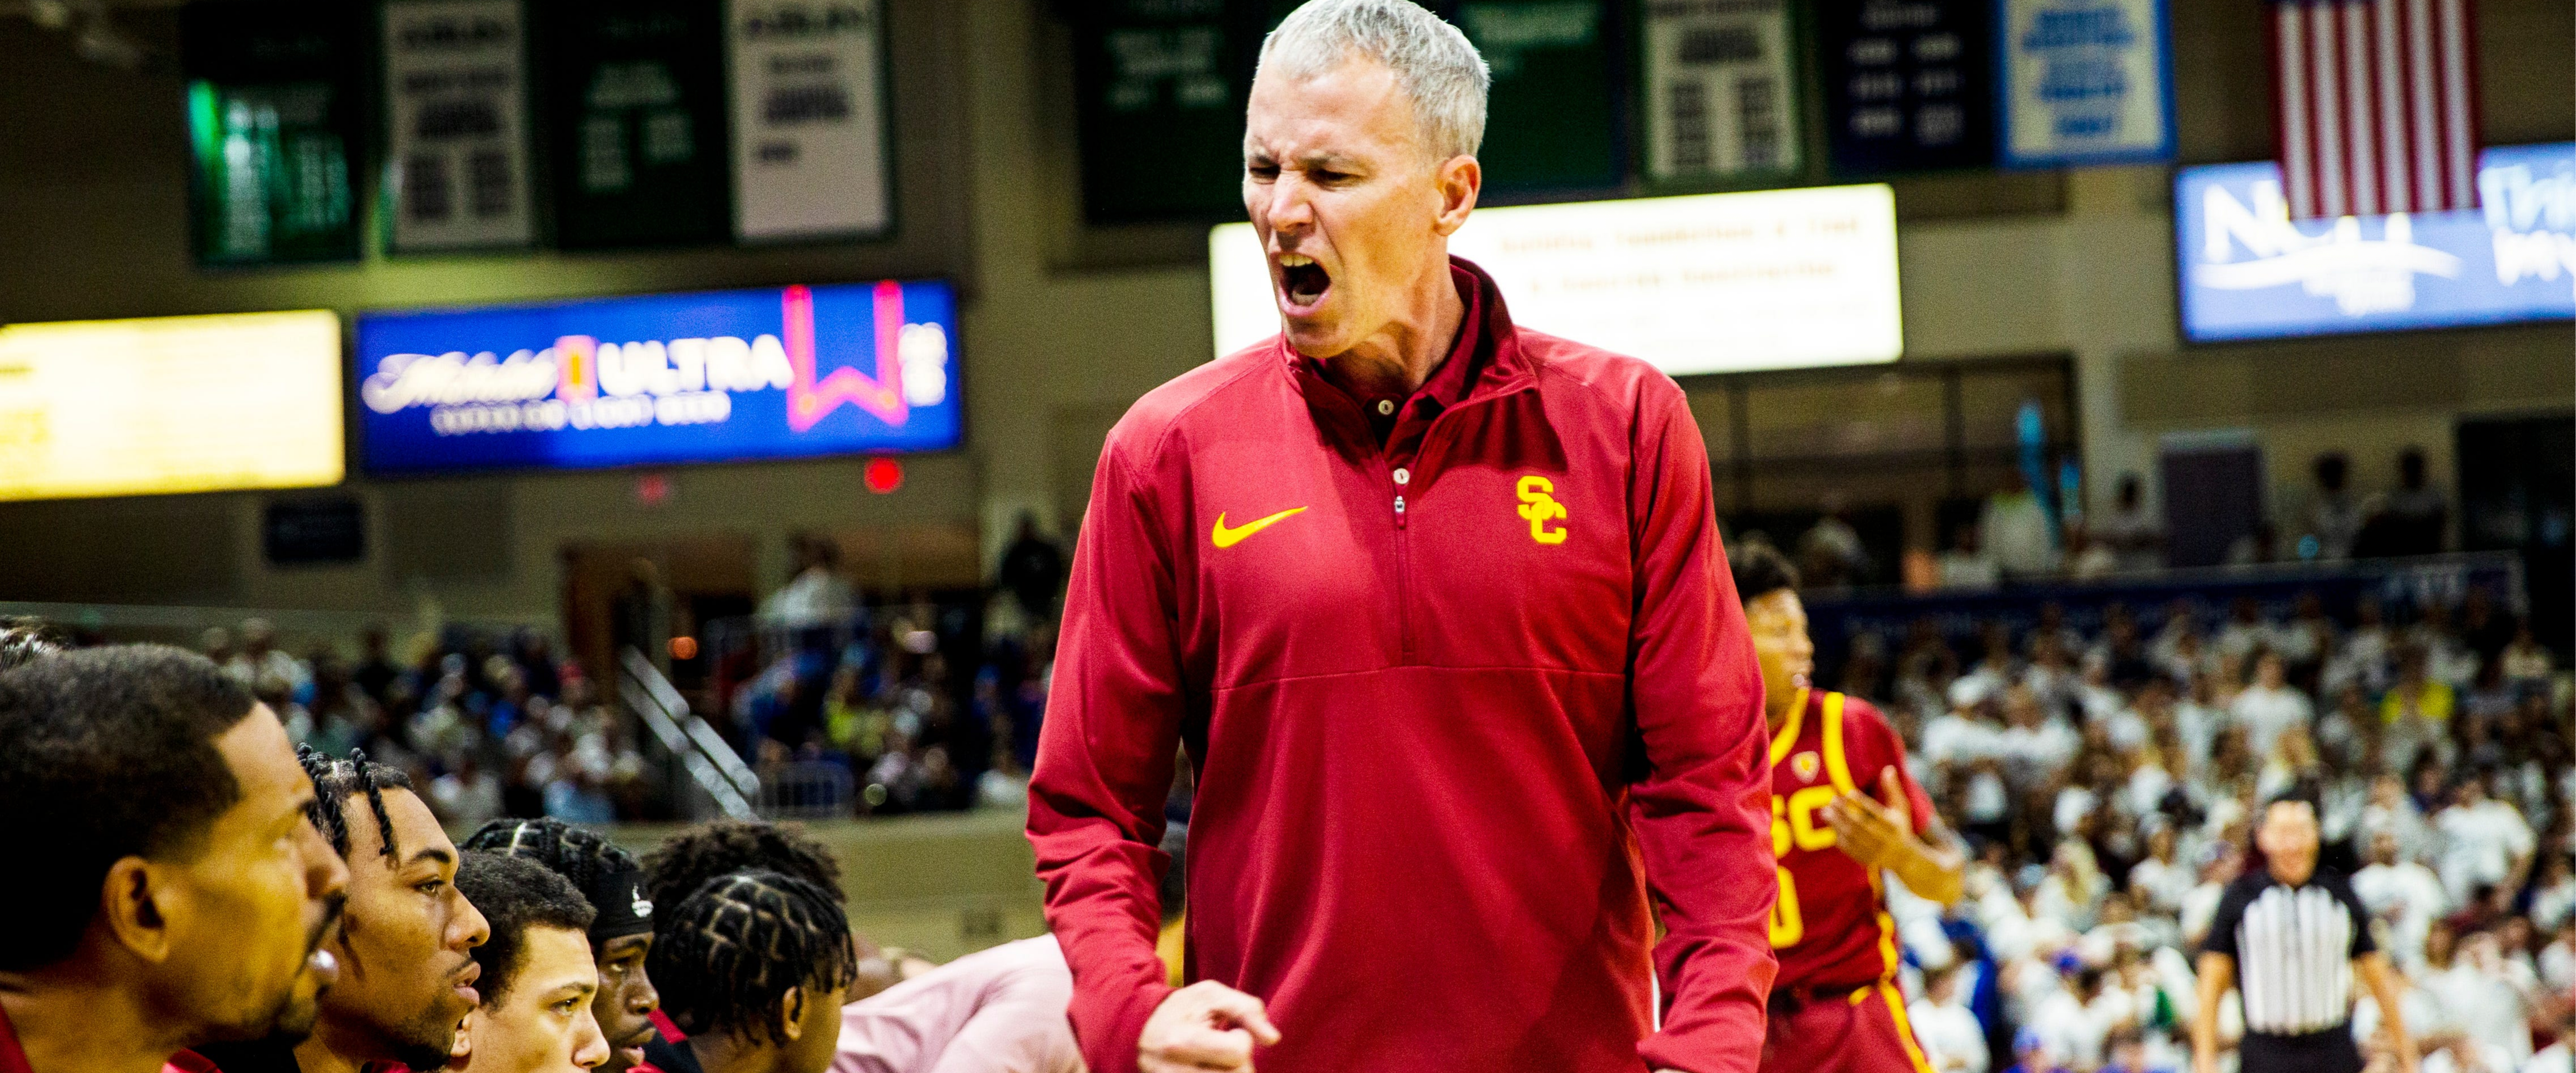 USC gives basketball coach Andy Enfield a 3-year contract extension through 2025-26